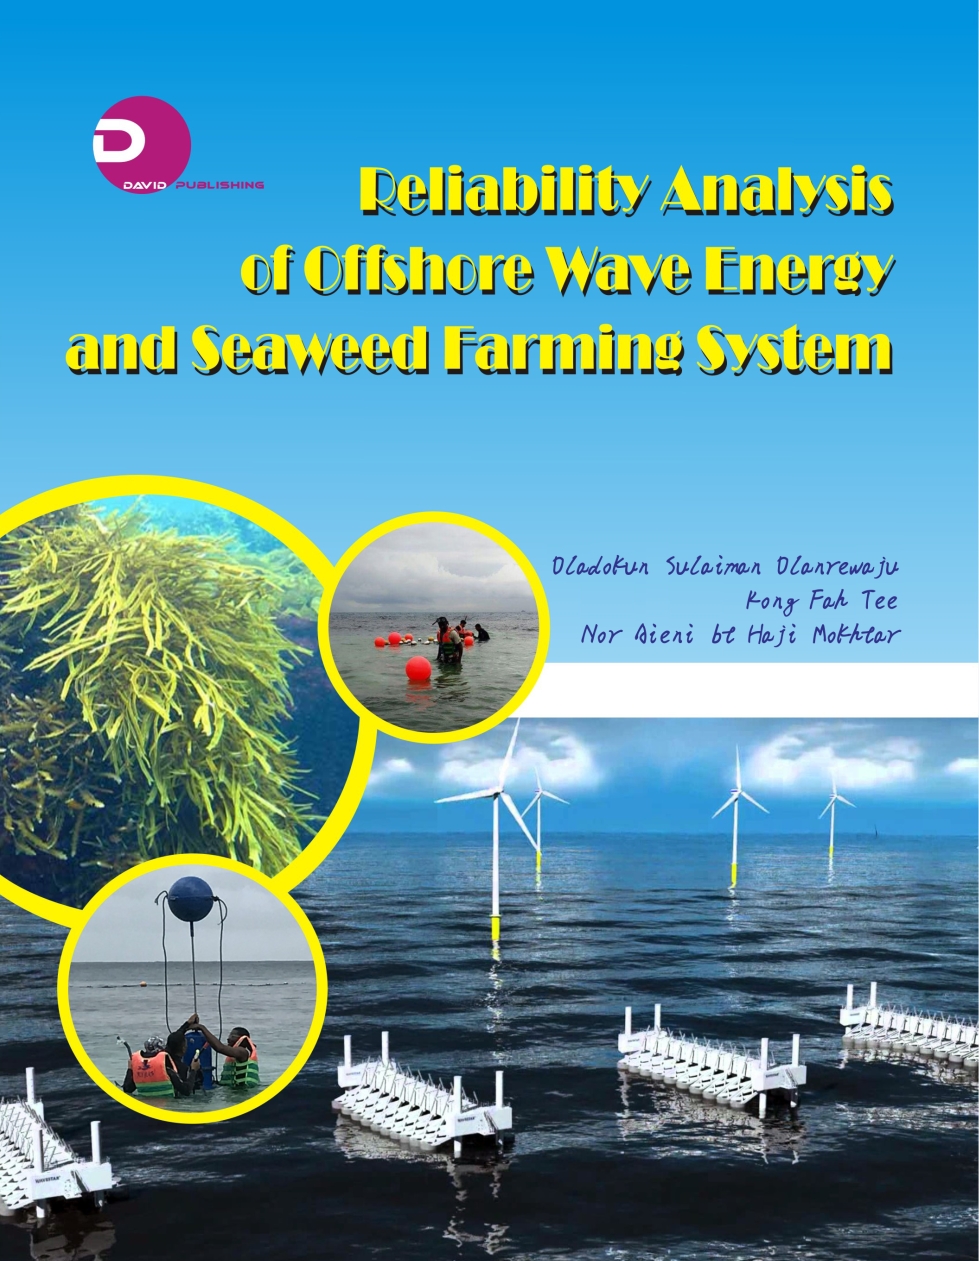 Reliability Analysis of Offshore Wave Energy and Seaweed Farming System